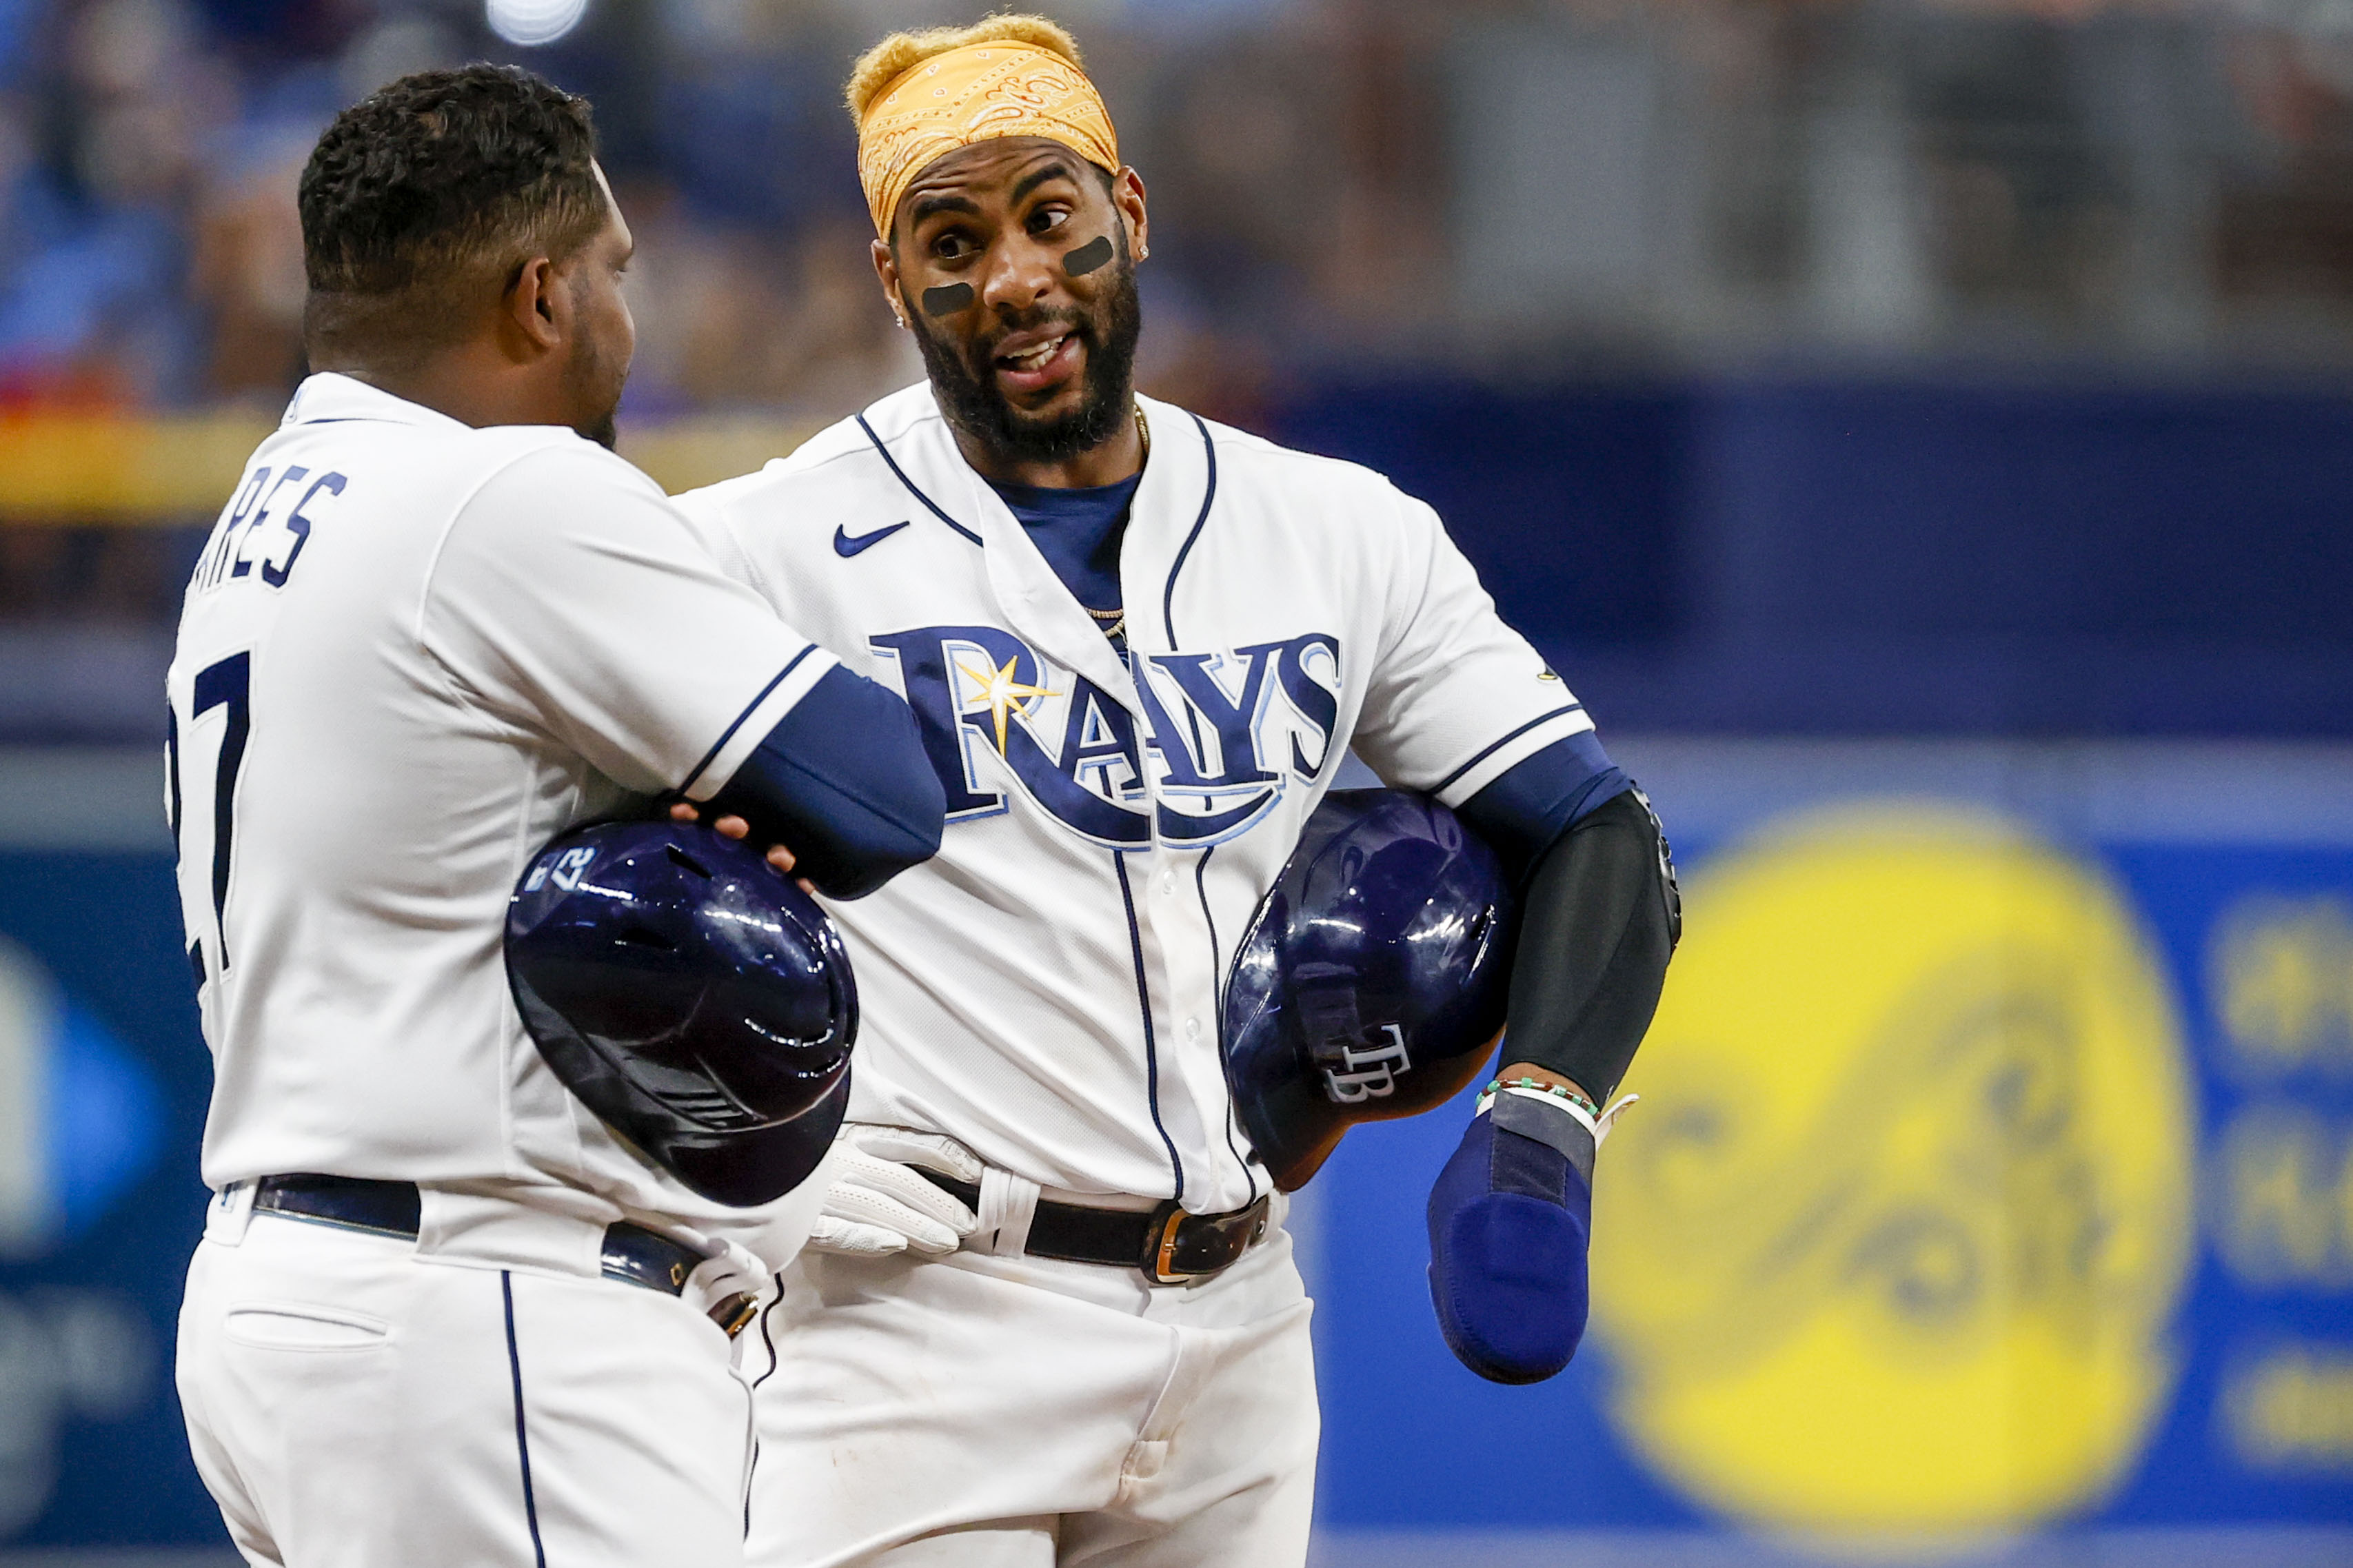 How Rays players are dealing with lockout uncertainty